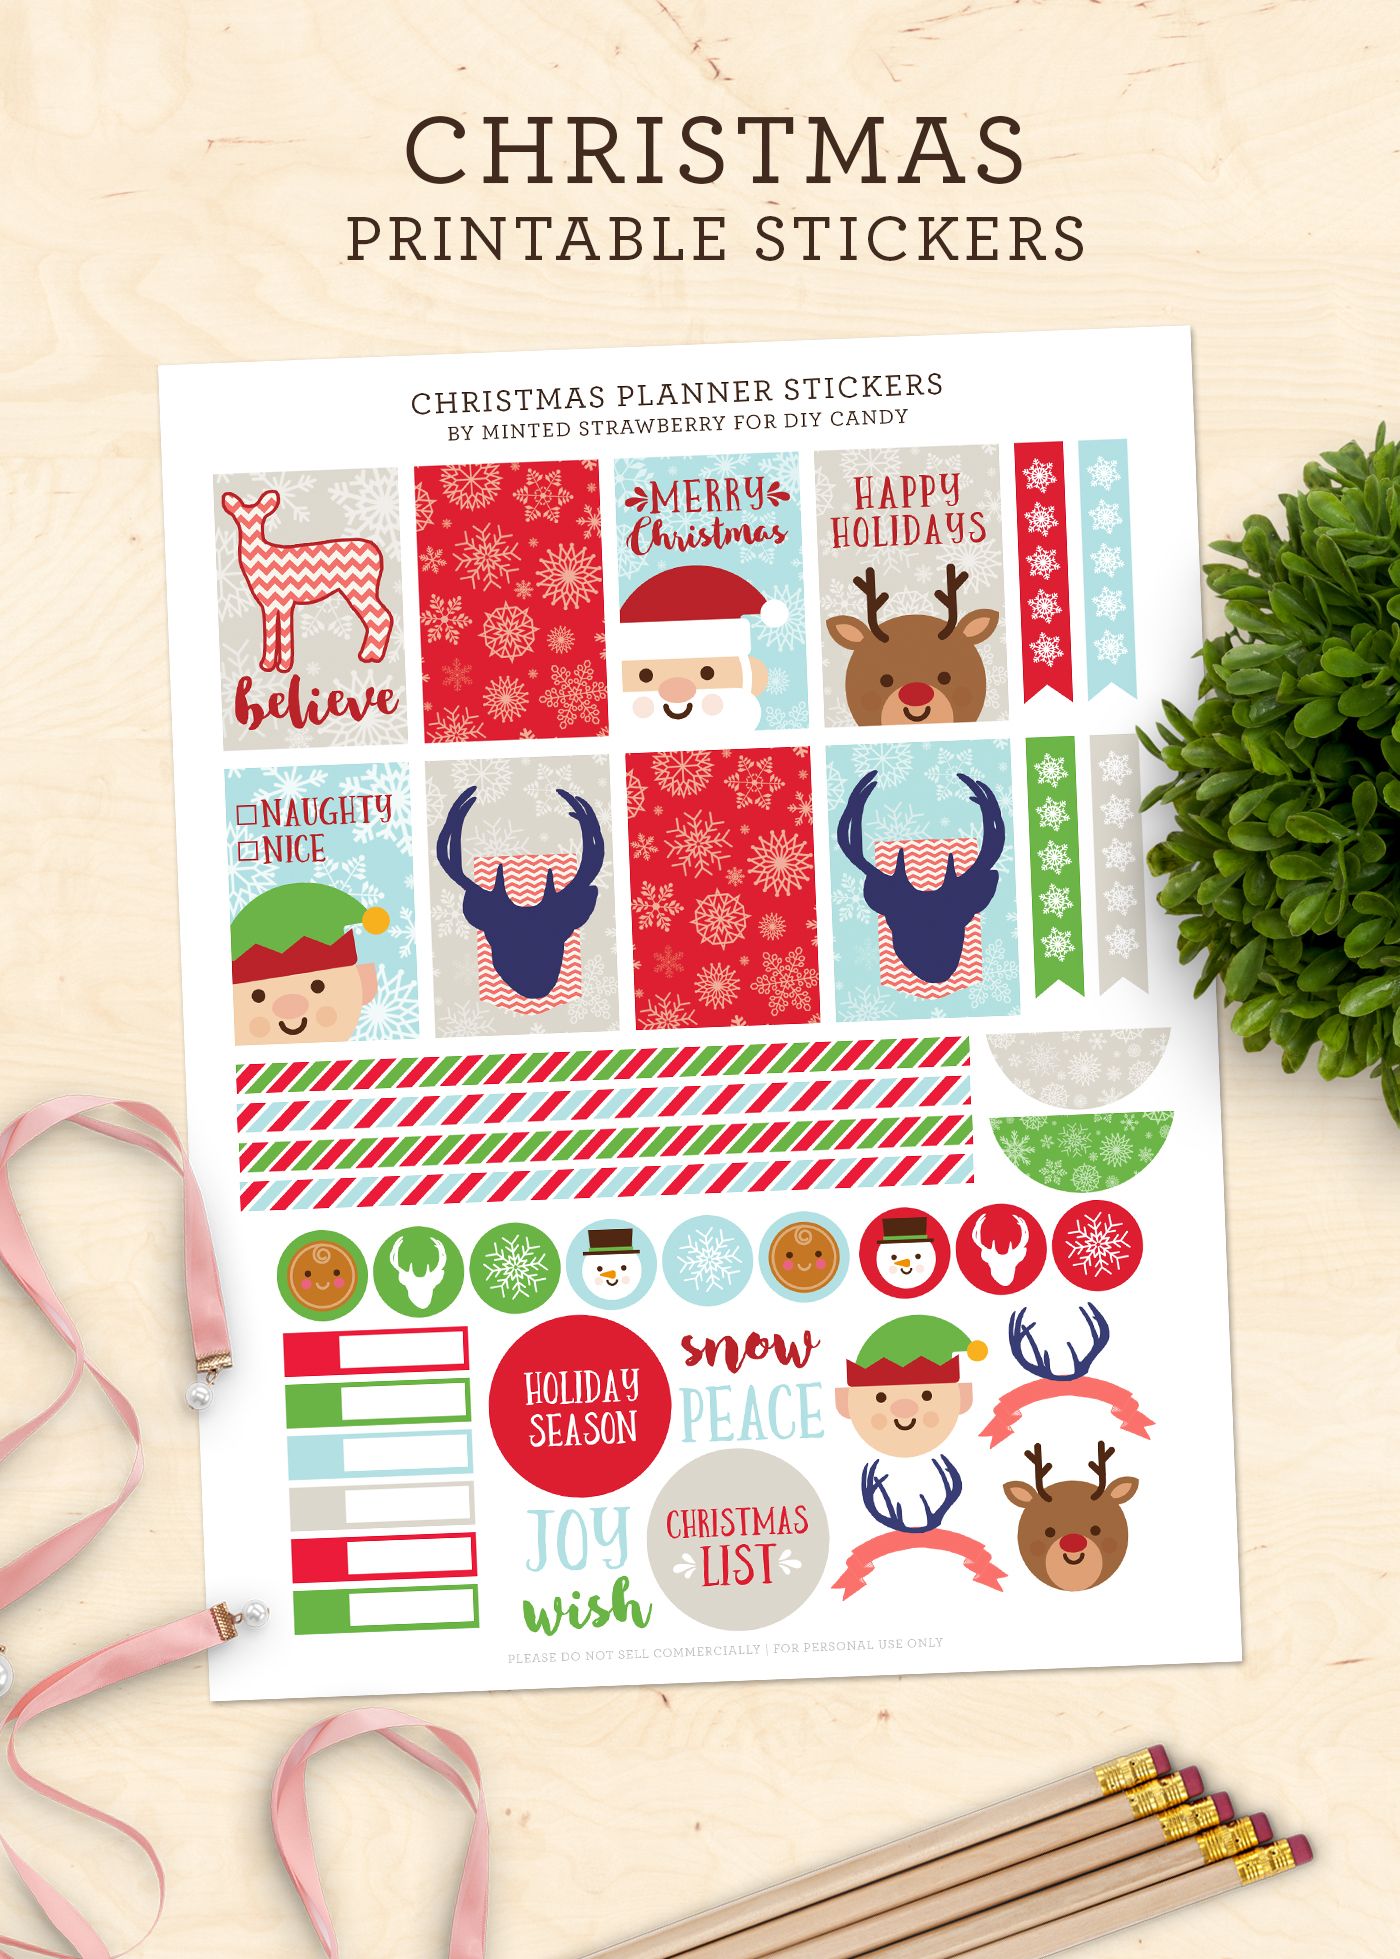 FREE Christmas Planner Printable Stickers!